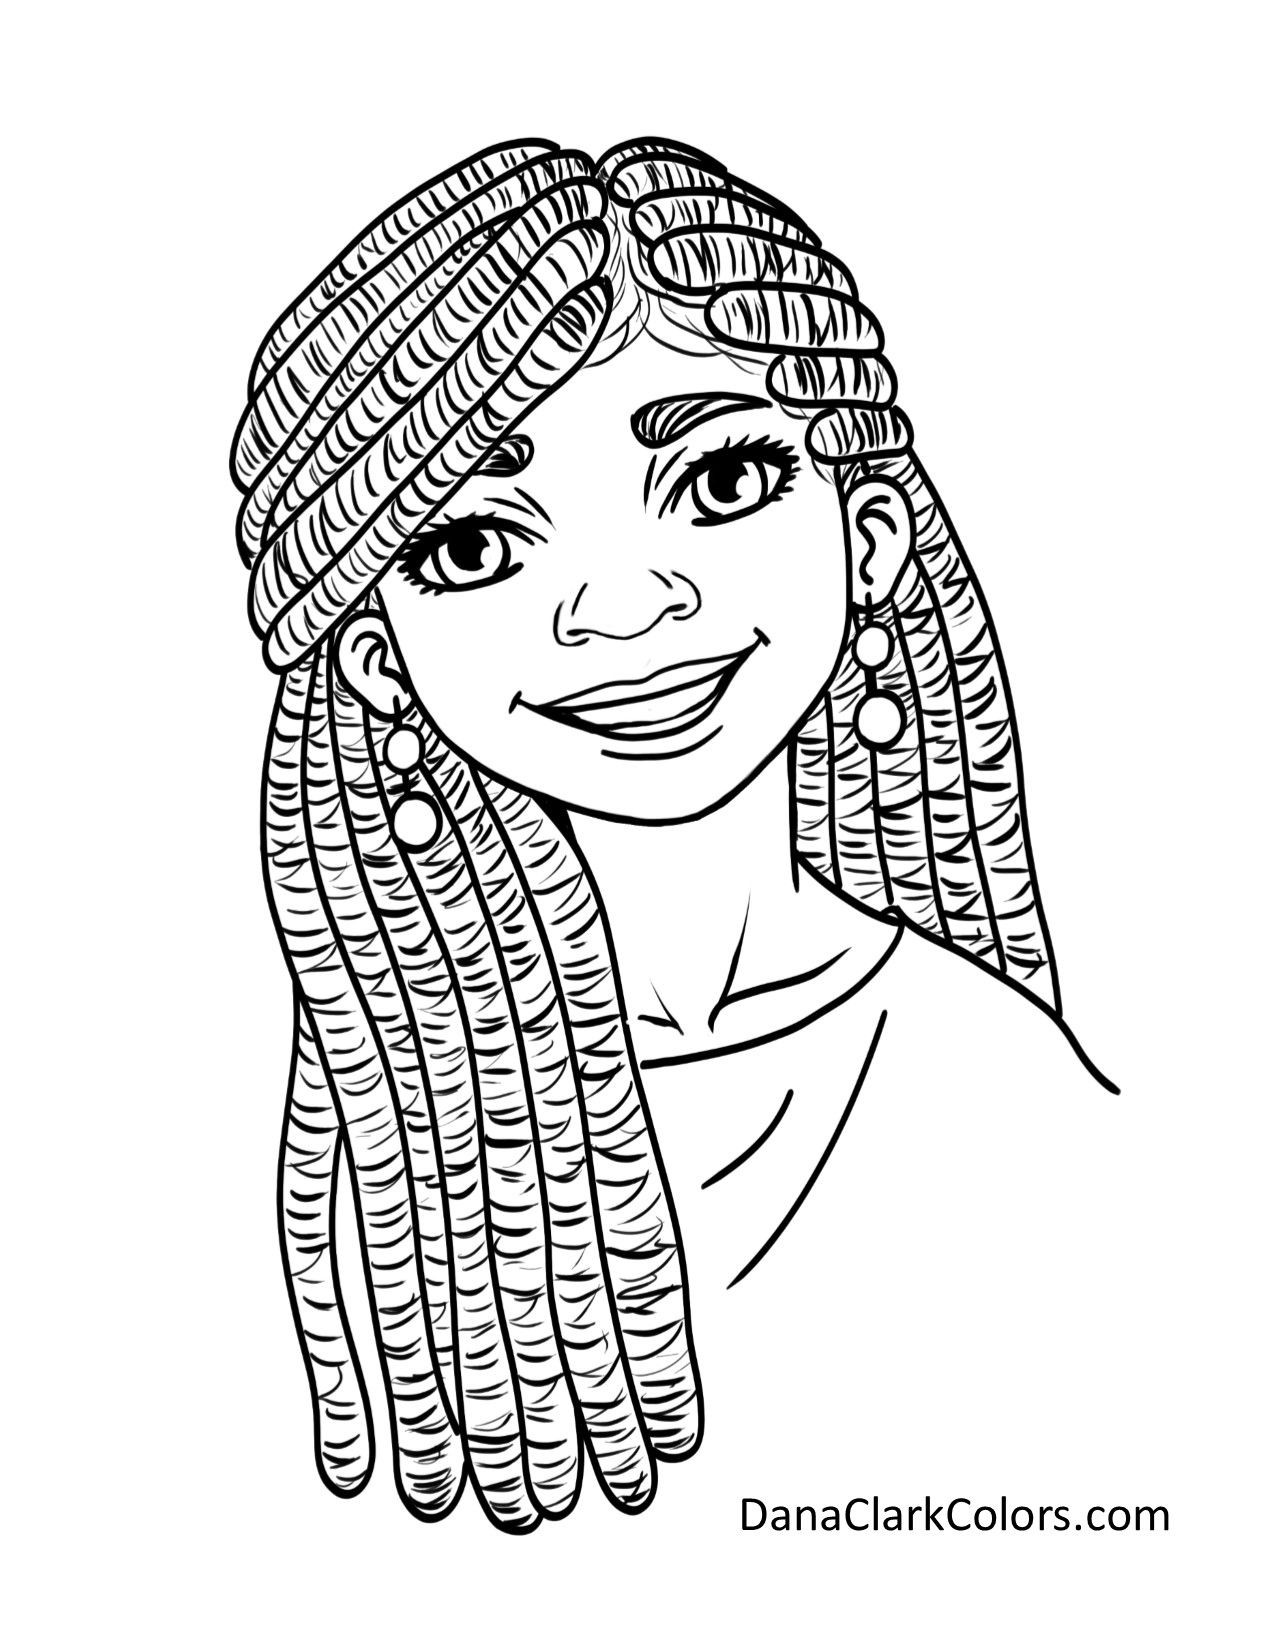 Black Girl Coloring Pages
 Black Kids coloring page AfricanAmericanColoringPage